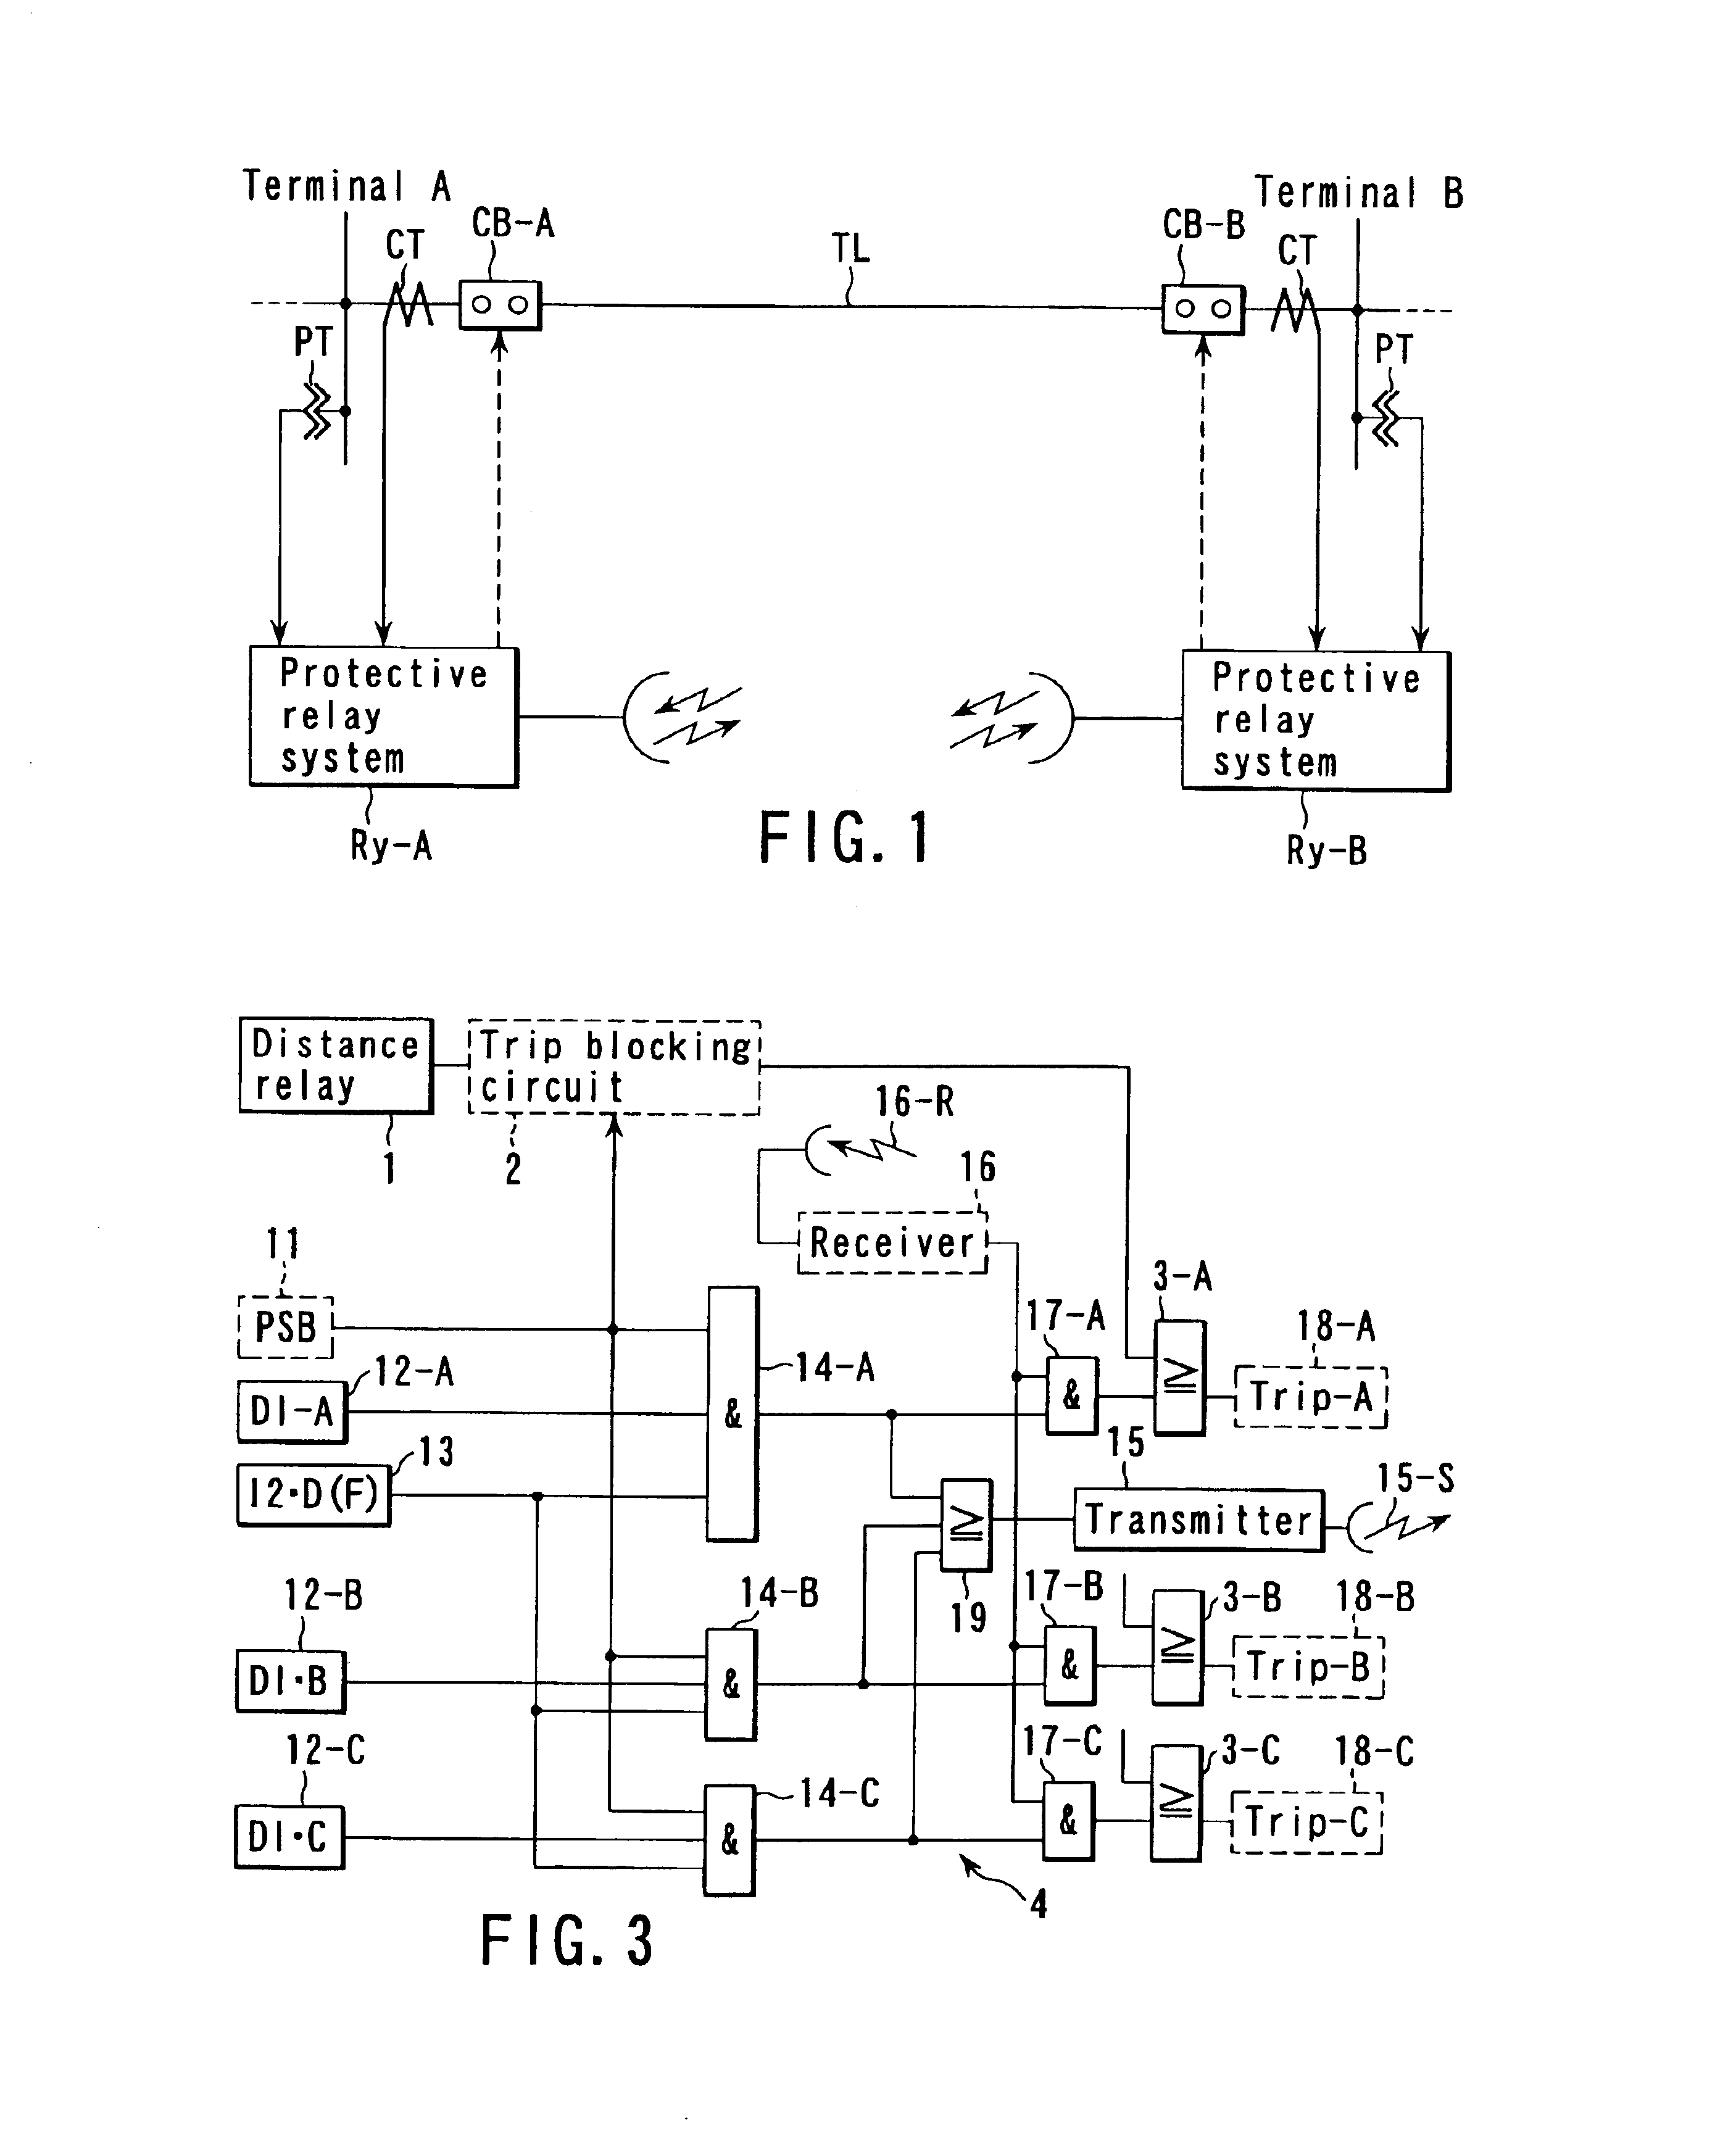 Protective relay system